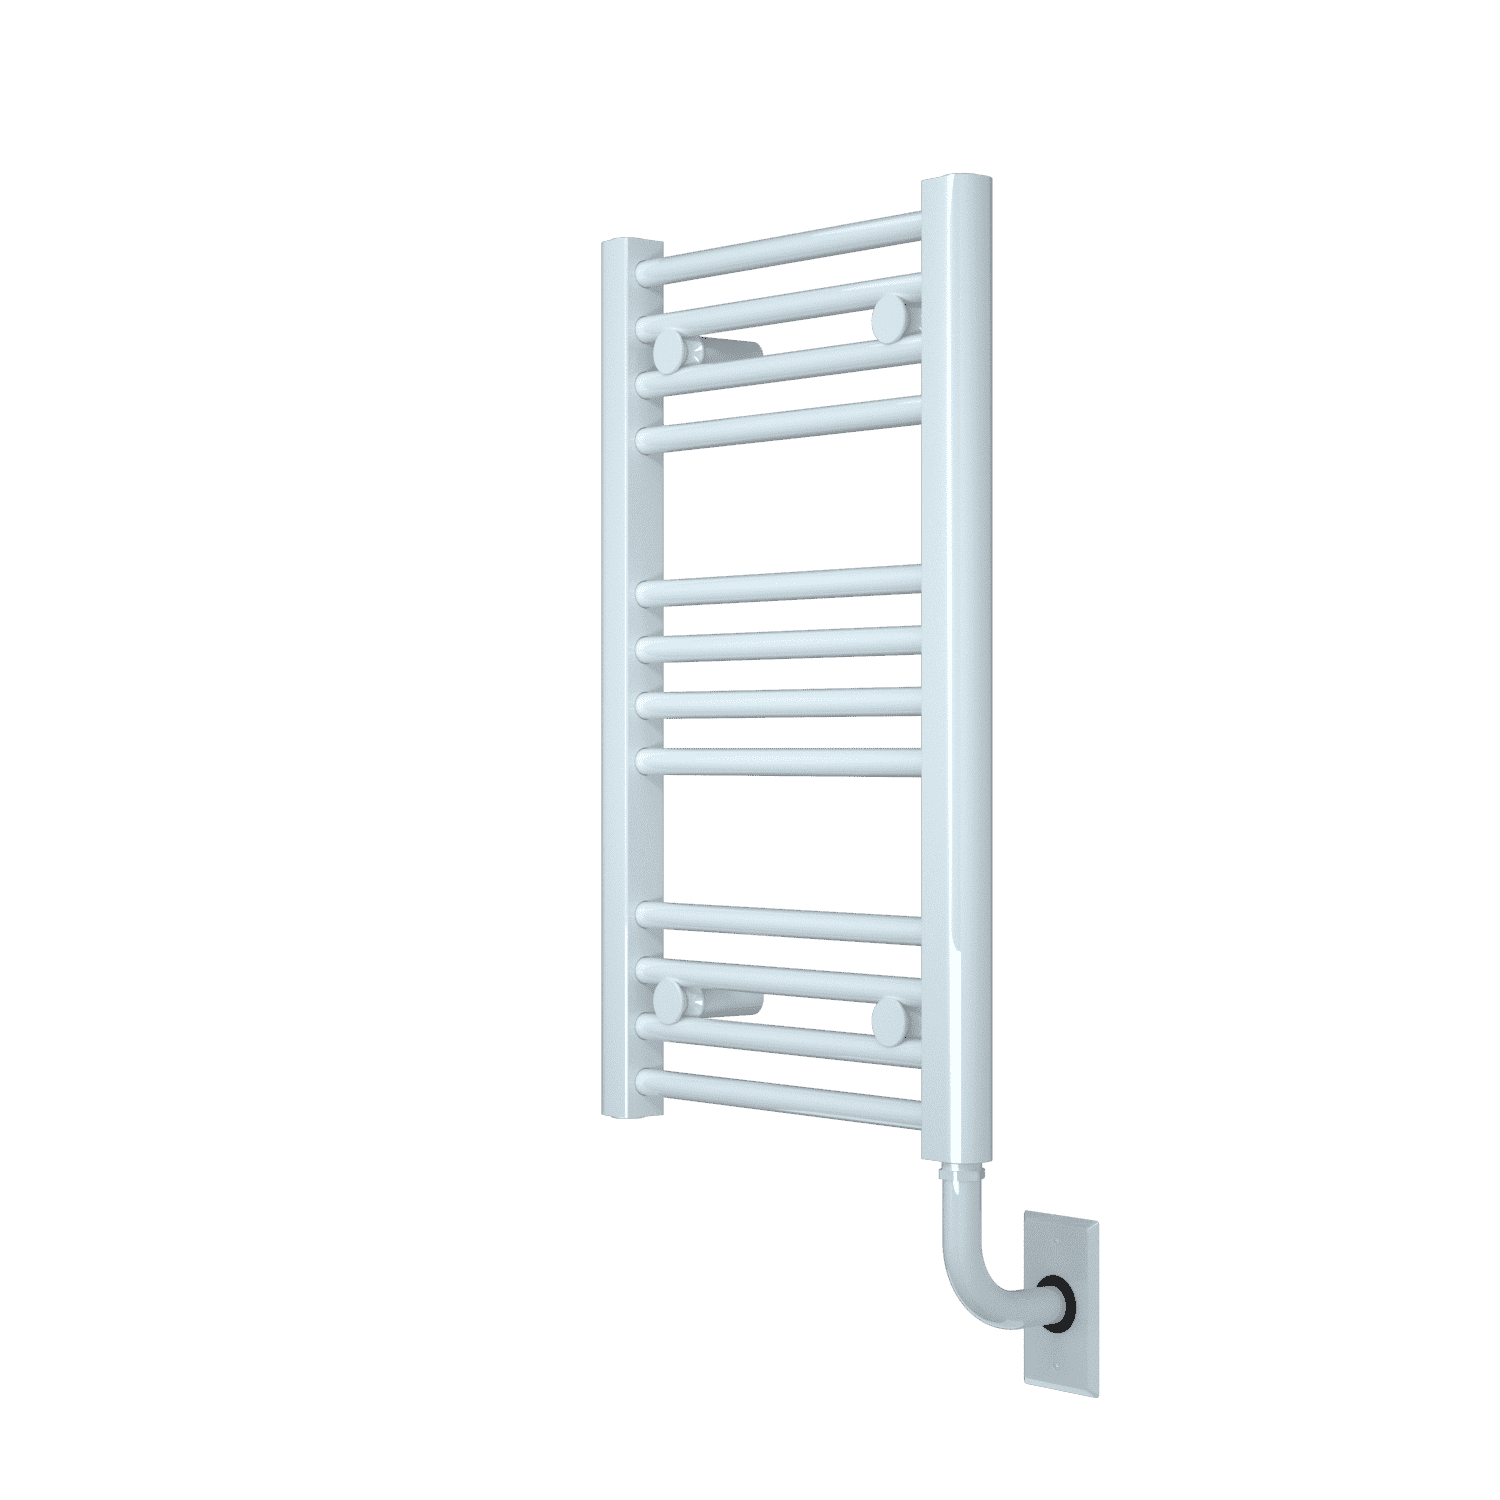 Stay Cozy and Dry with the Tuzio Savoy Hardwired/Plug-in Towel Warmer -  15.5w x 25h